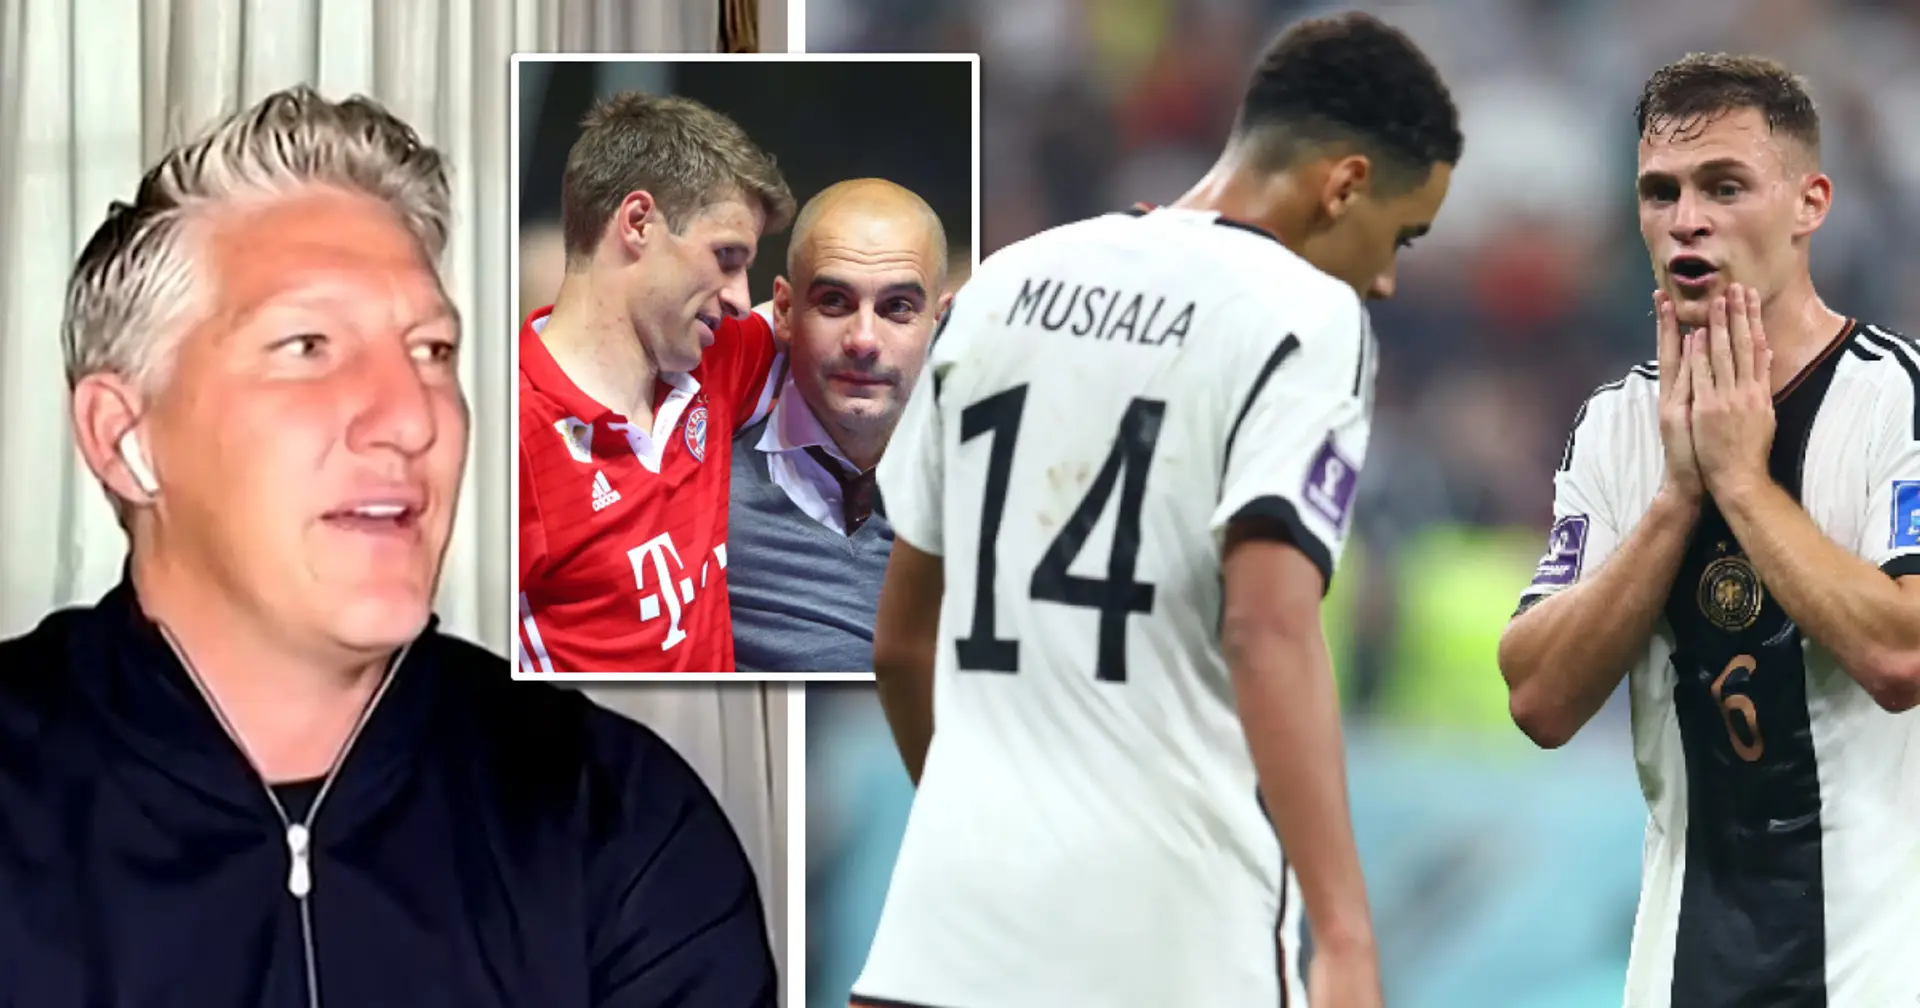 'We were kind of losing our values': Schweinsteiger blames Guardiola for Germany's recent decline